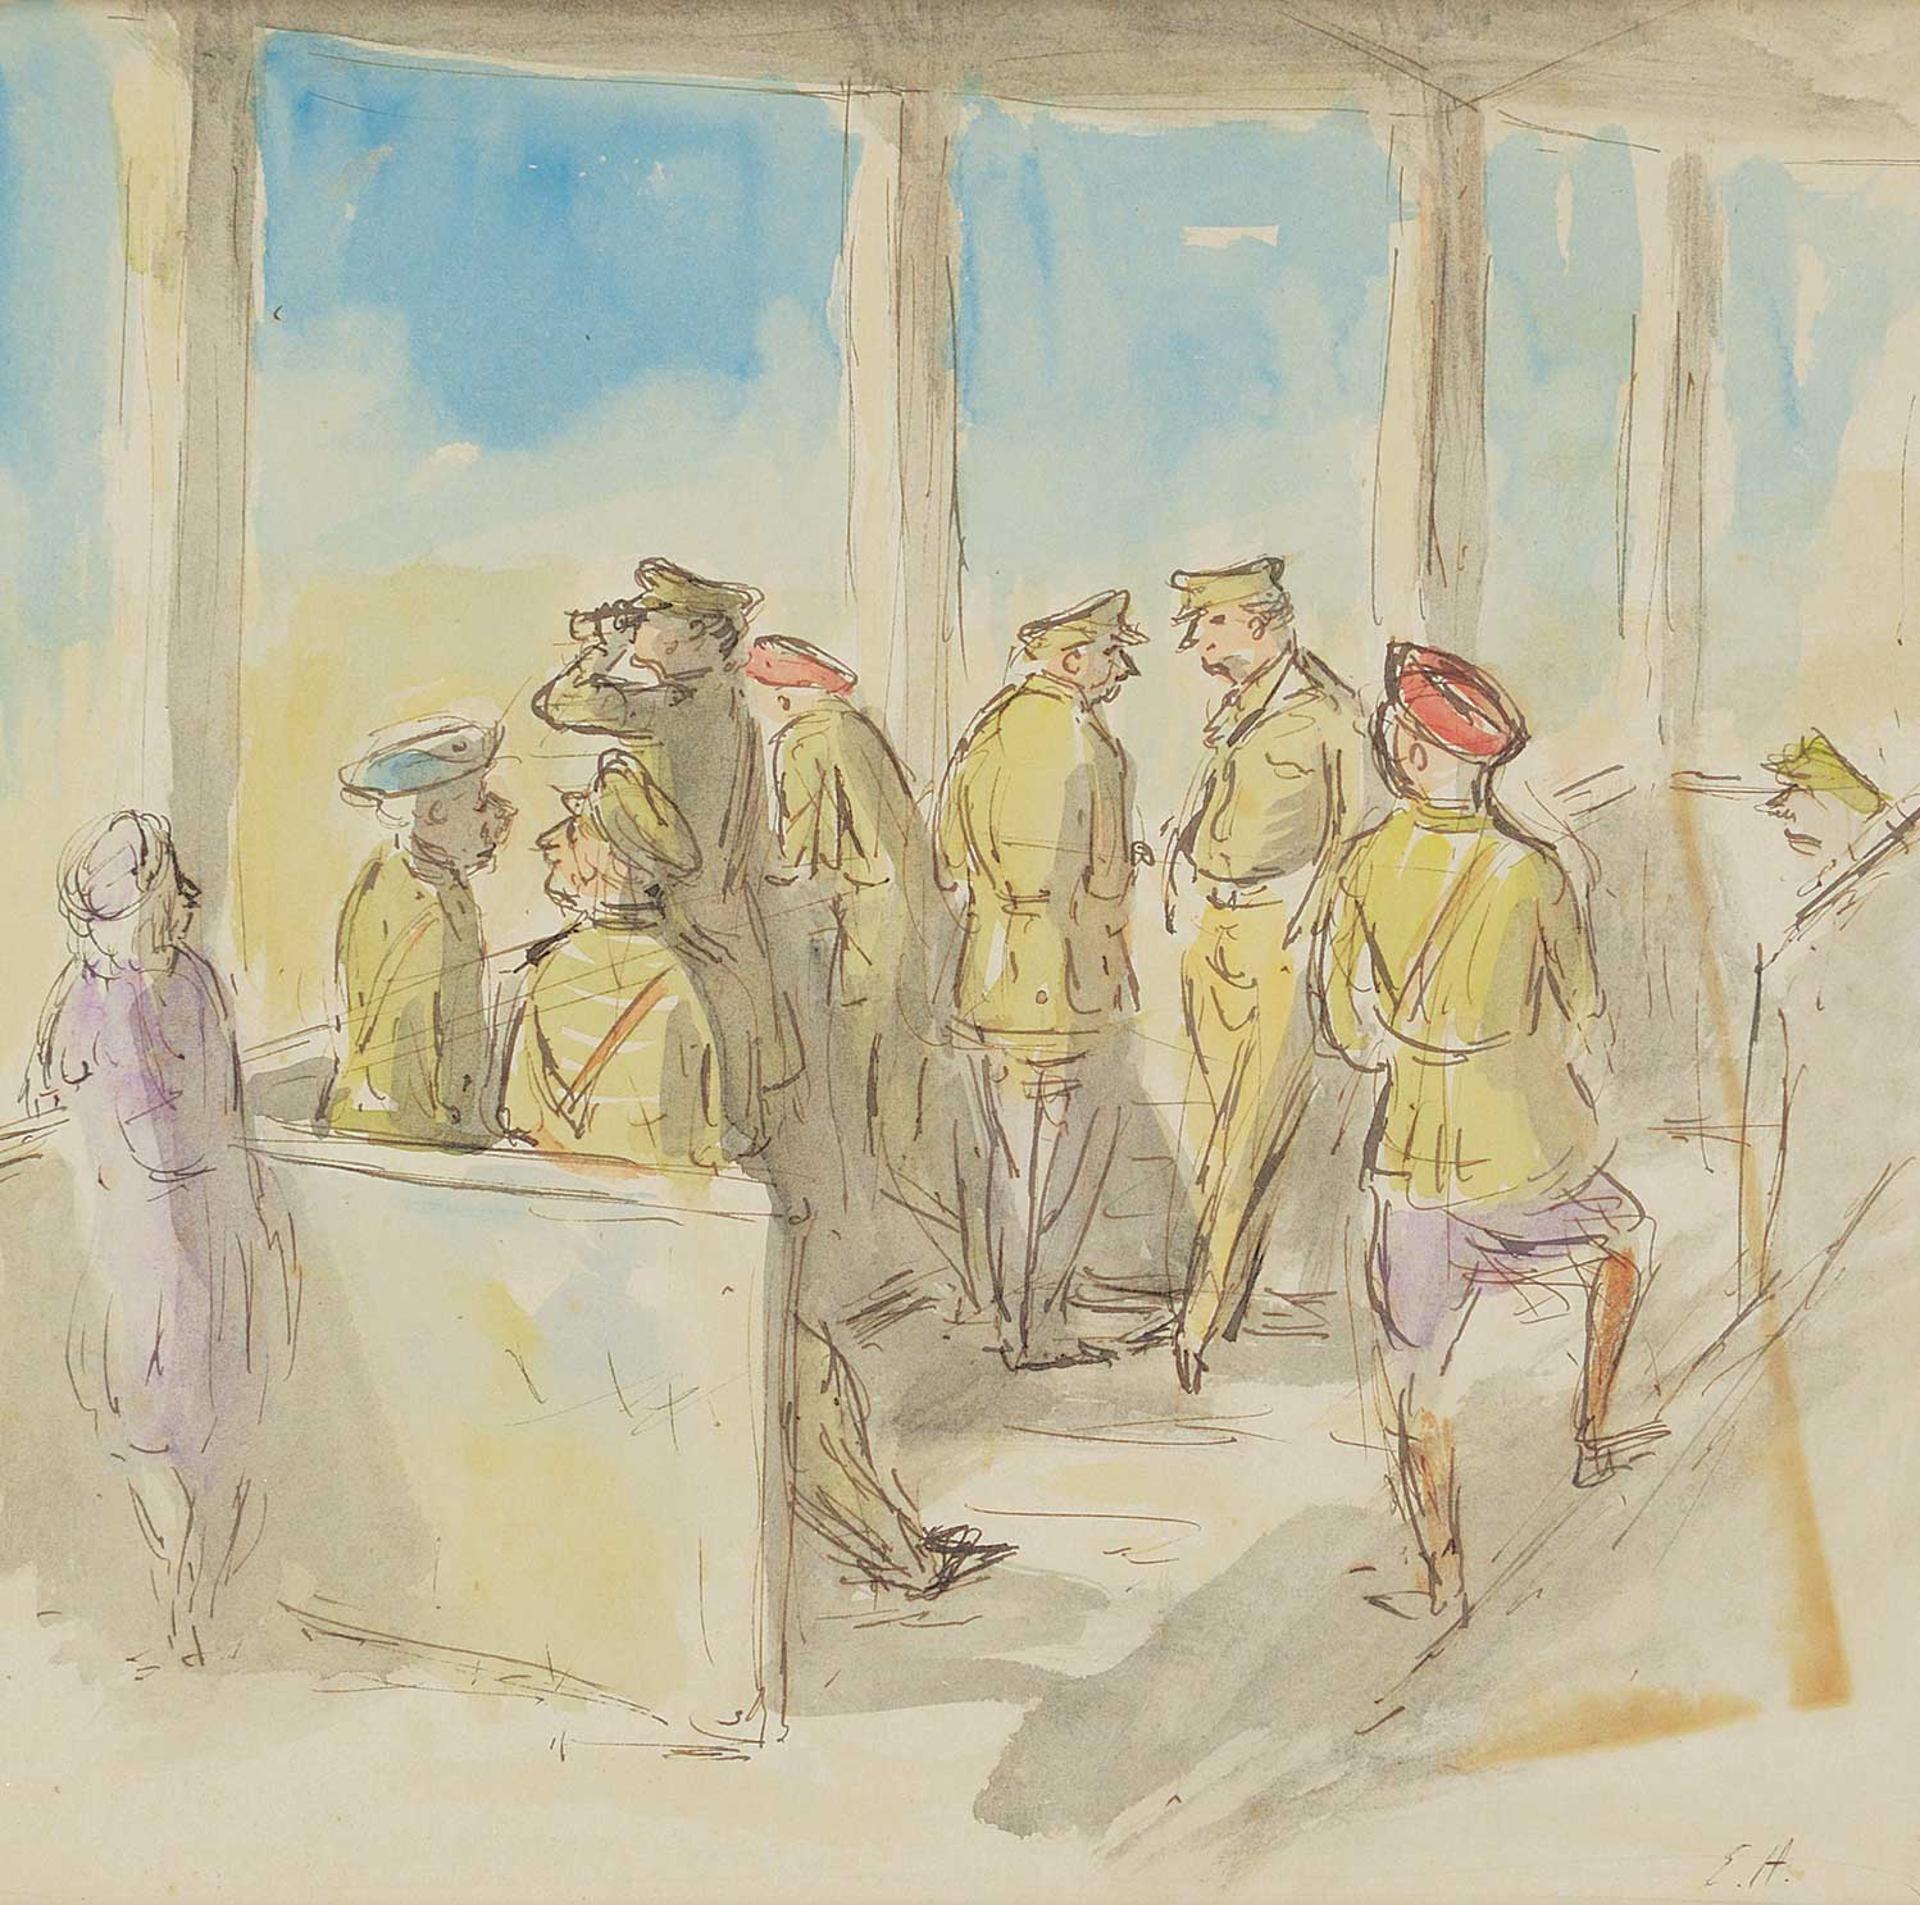 Edward Jeffrey Irving Ardizzone - Untitled - Soldiers on the Viewing Deck